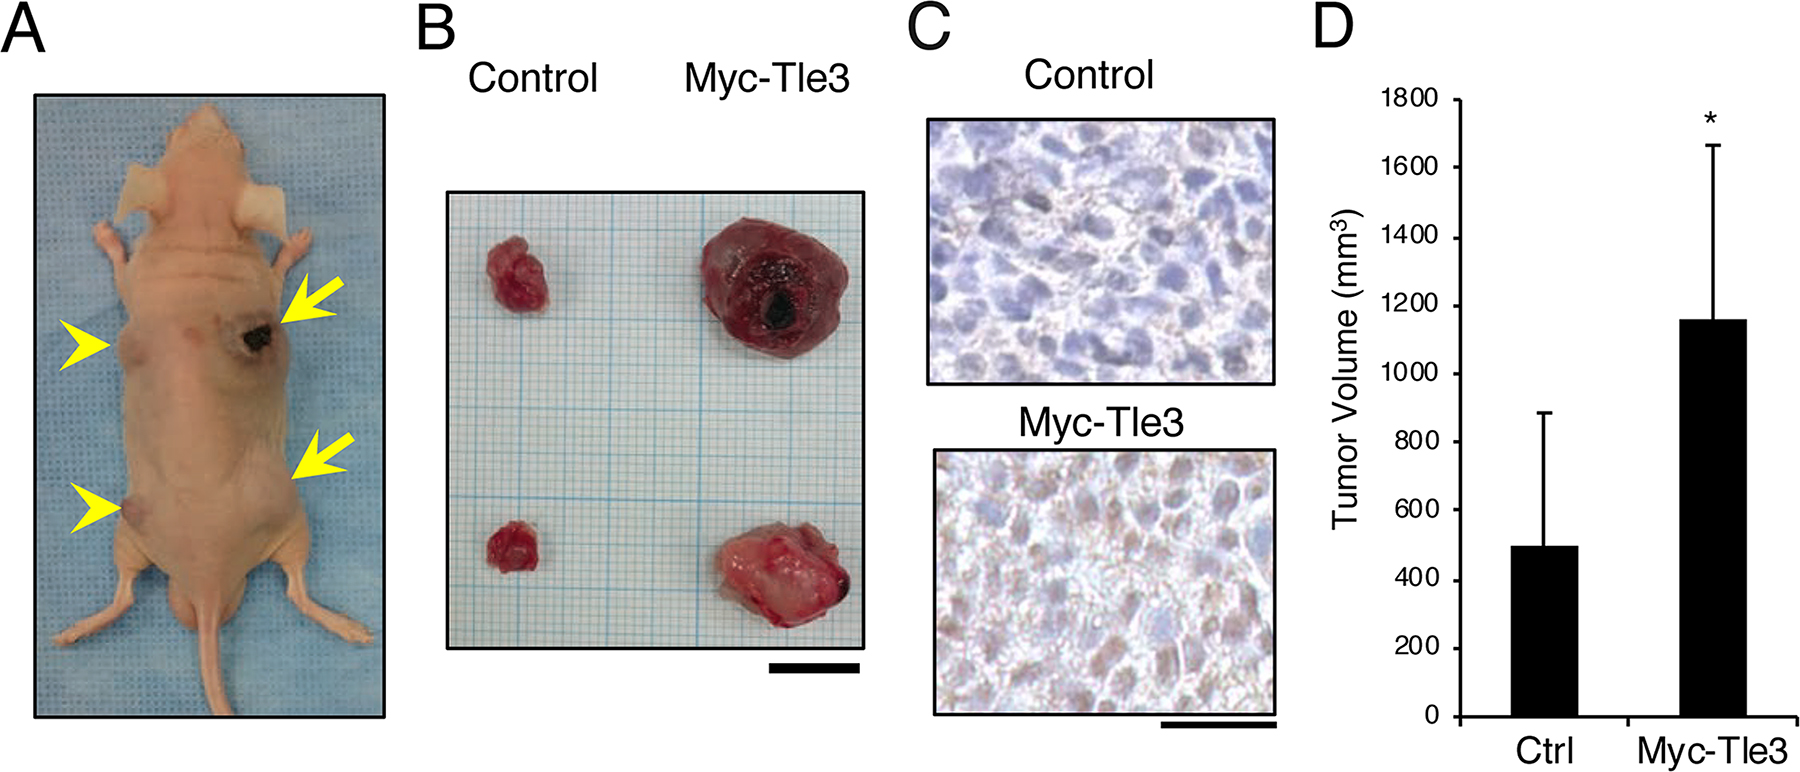 Overexpression of Myc-Tle3 in subcutaneously injected B16 melanoma cells increases tumor size in vivo.